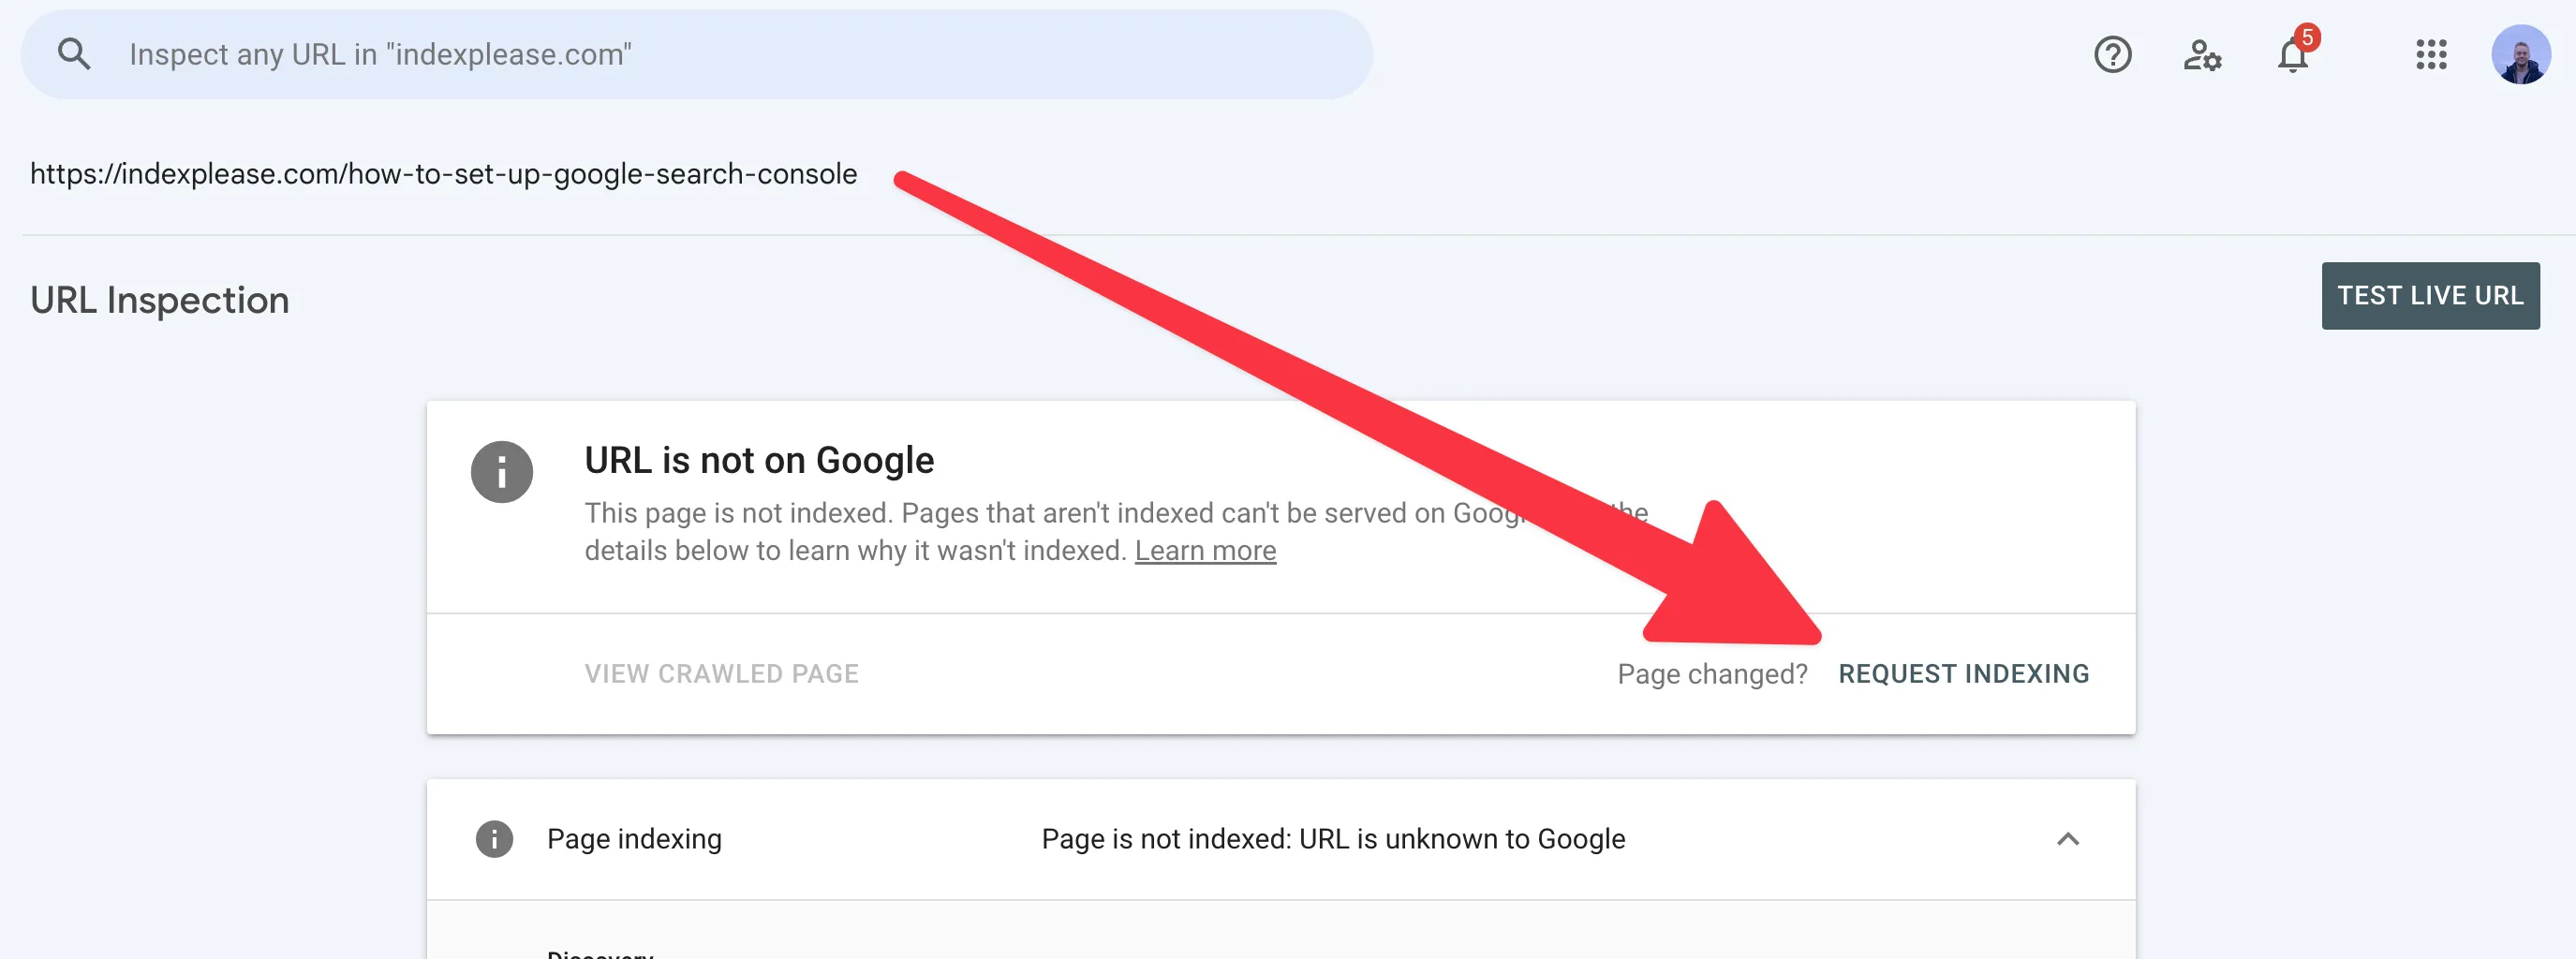 Request indexing on Google Search Console